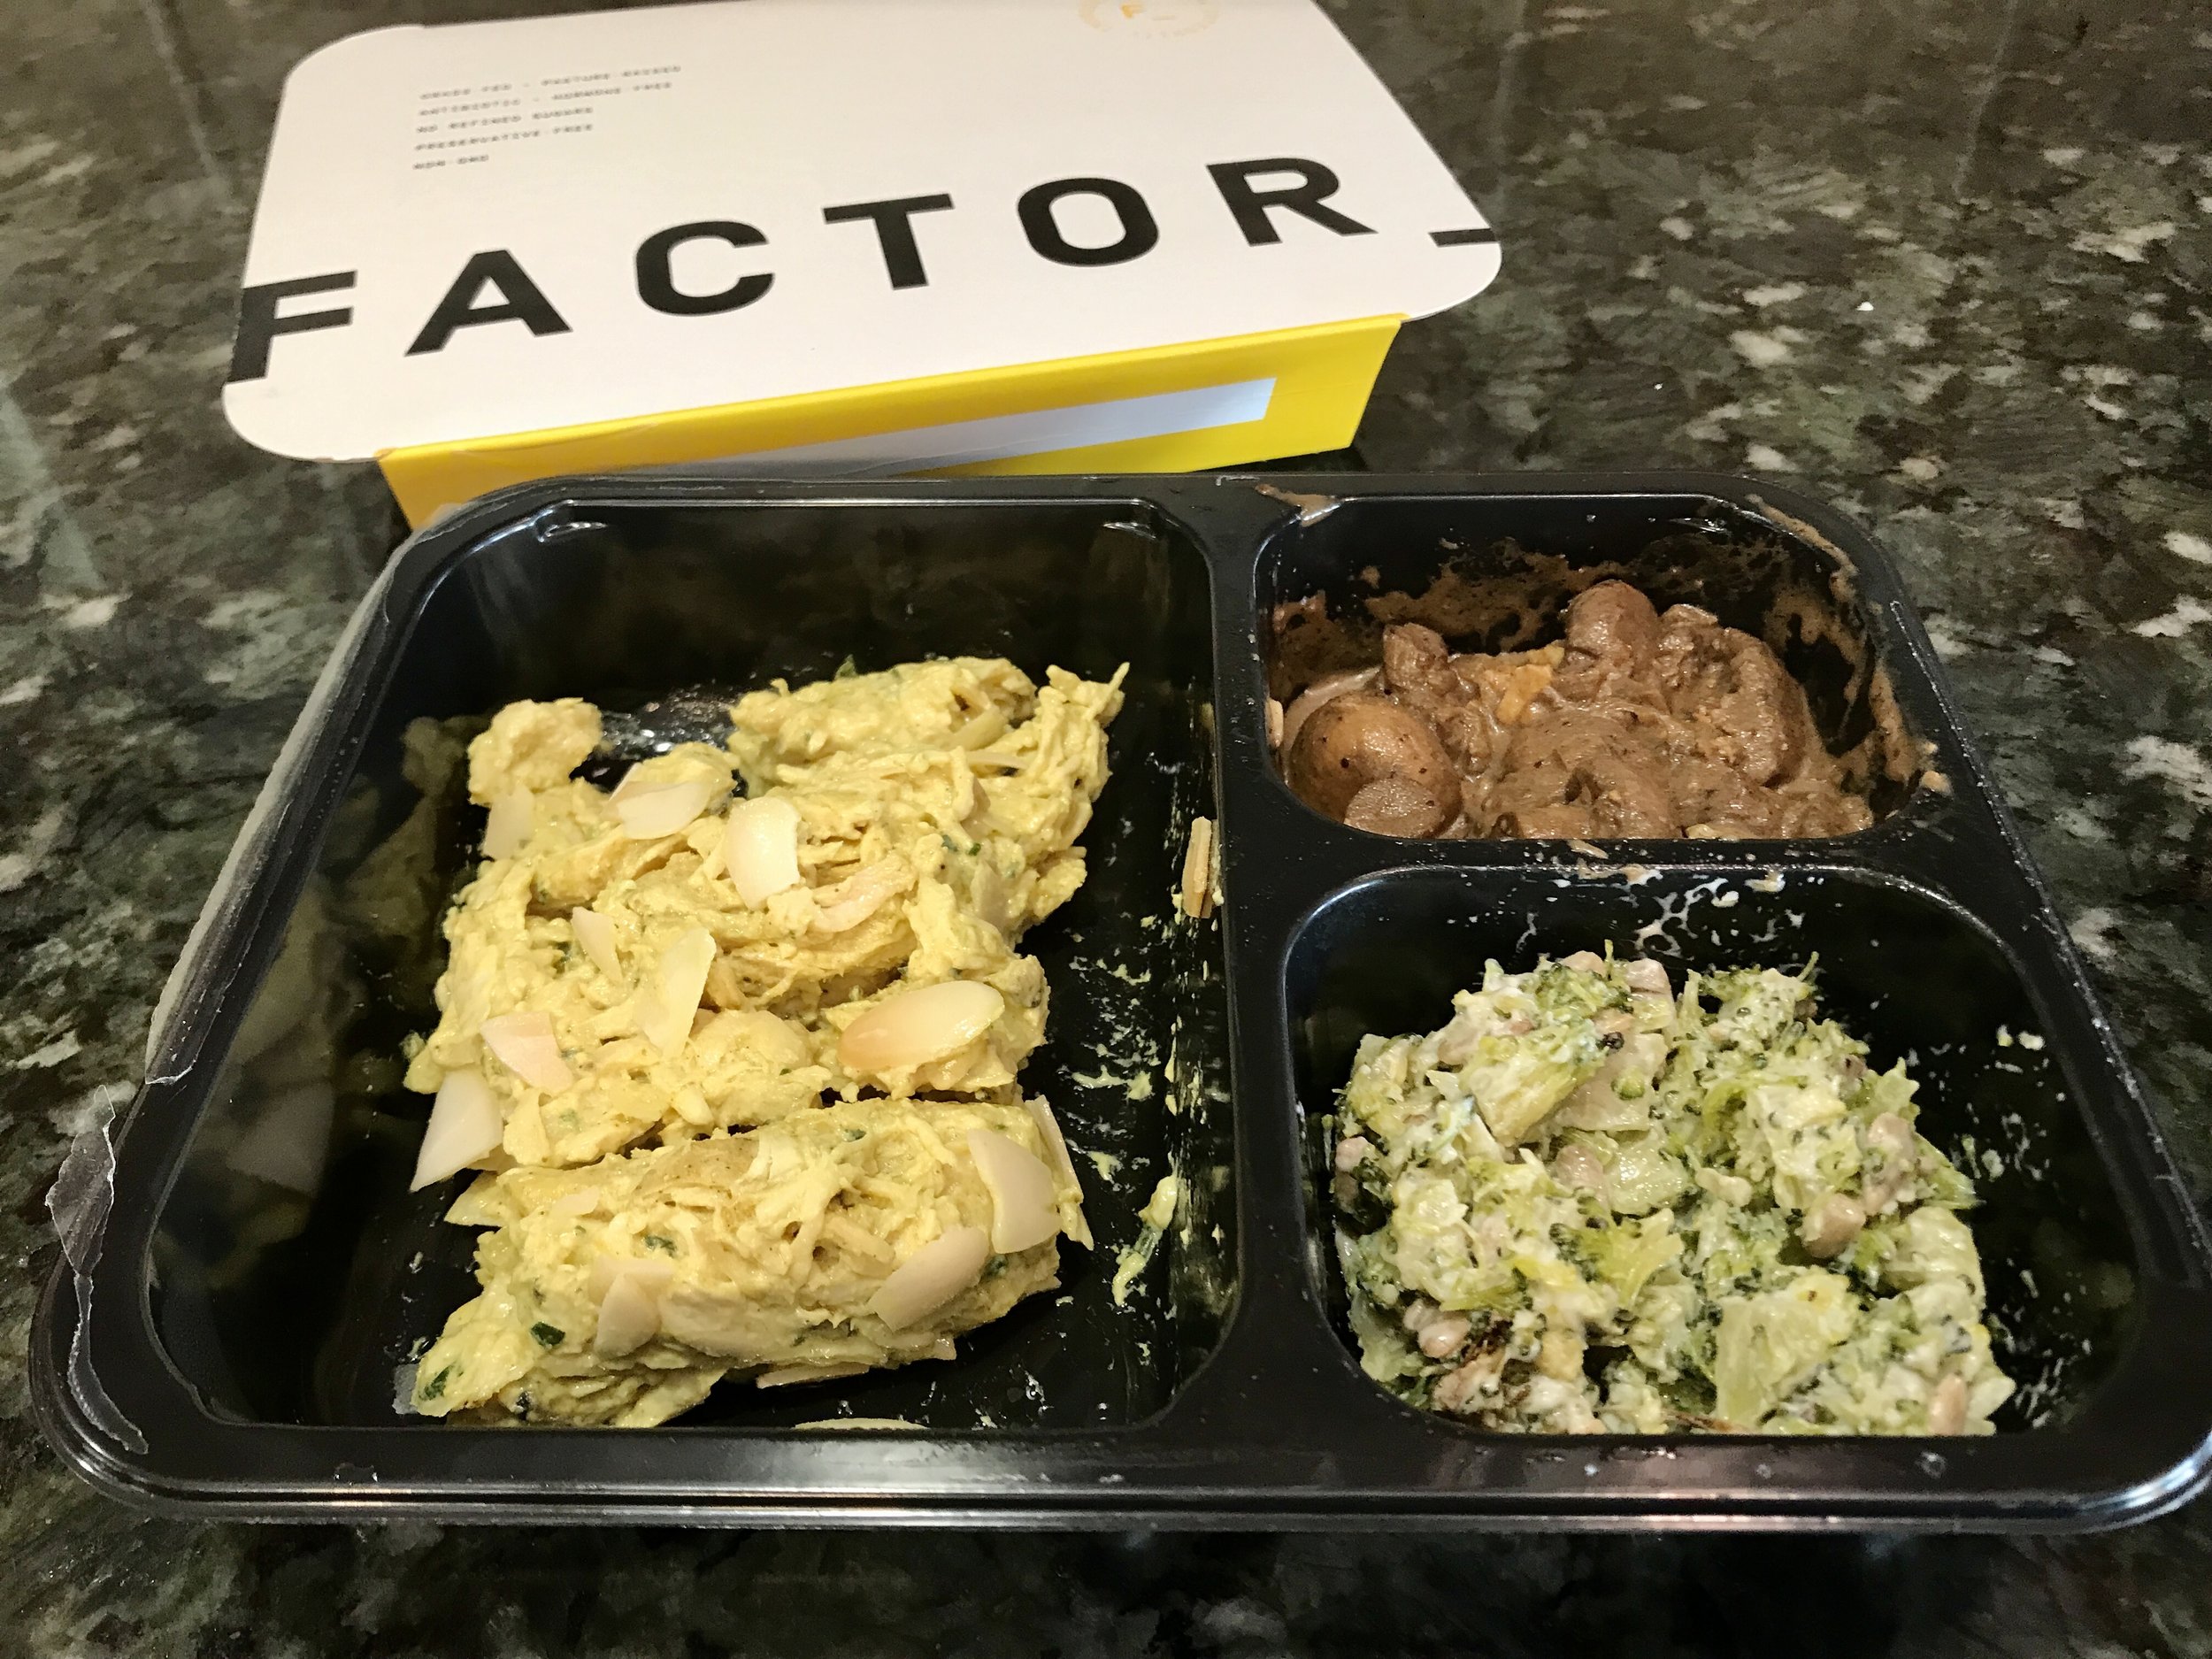 Factor 75 Review: Healthy AND Organic Meals - MBSF